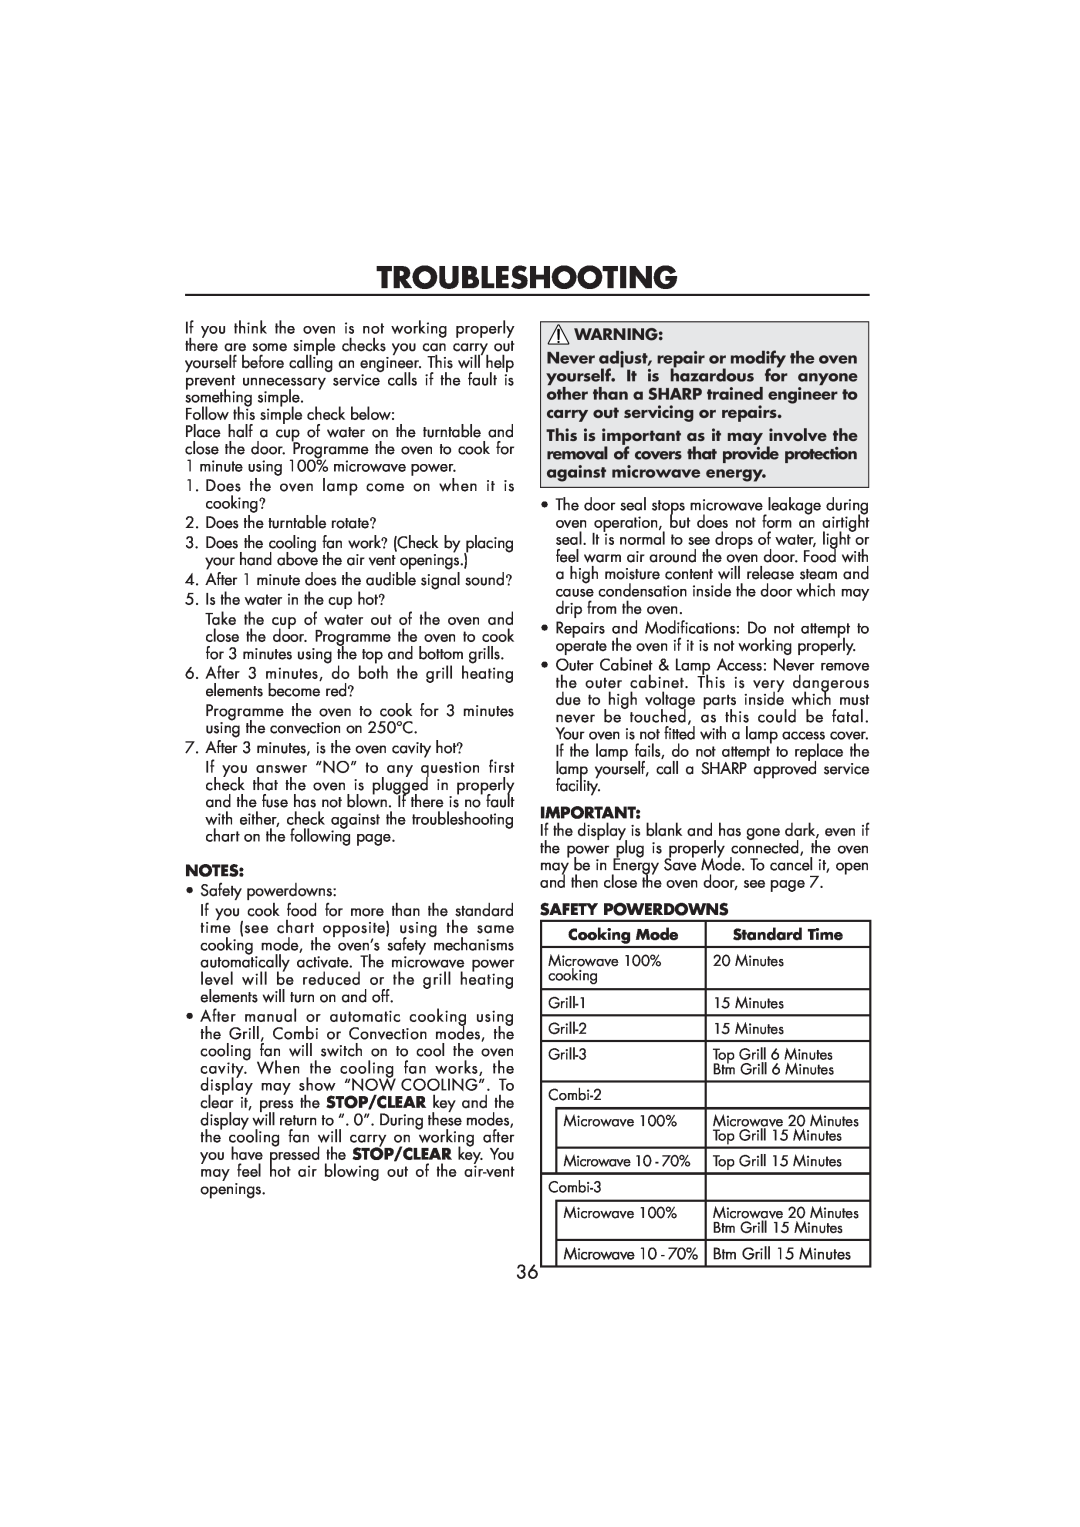 Sharp R-890SLM operation manual Troubleshooting, Safety Powerdowns, Cooking Mode, Standard Time 